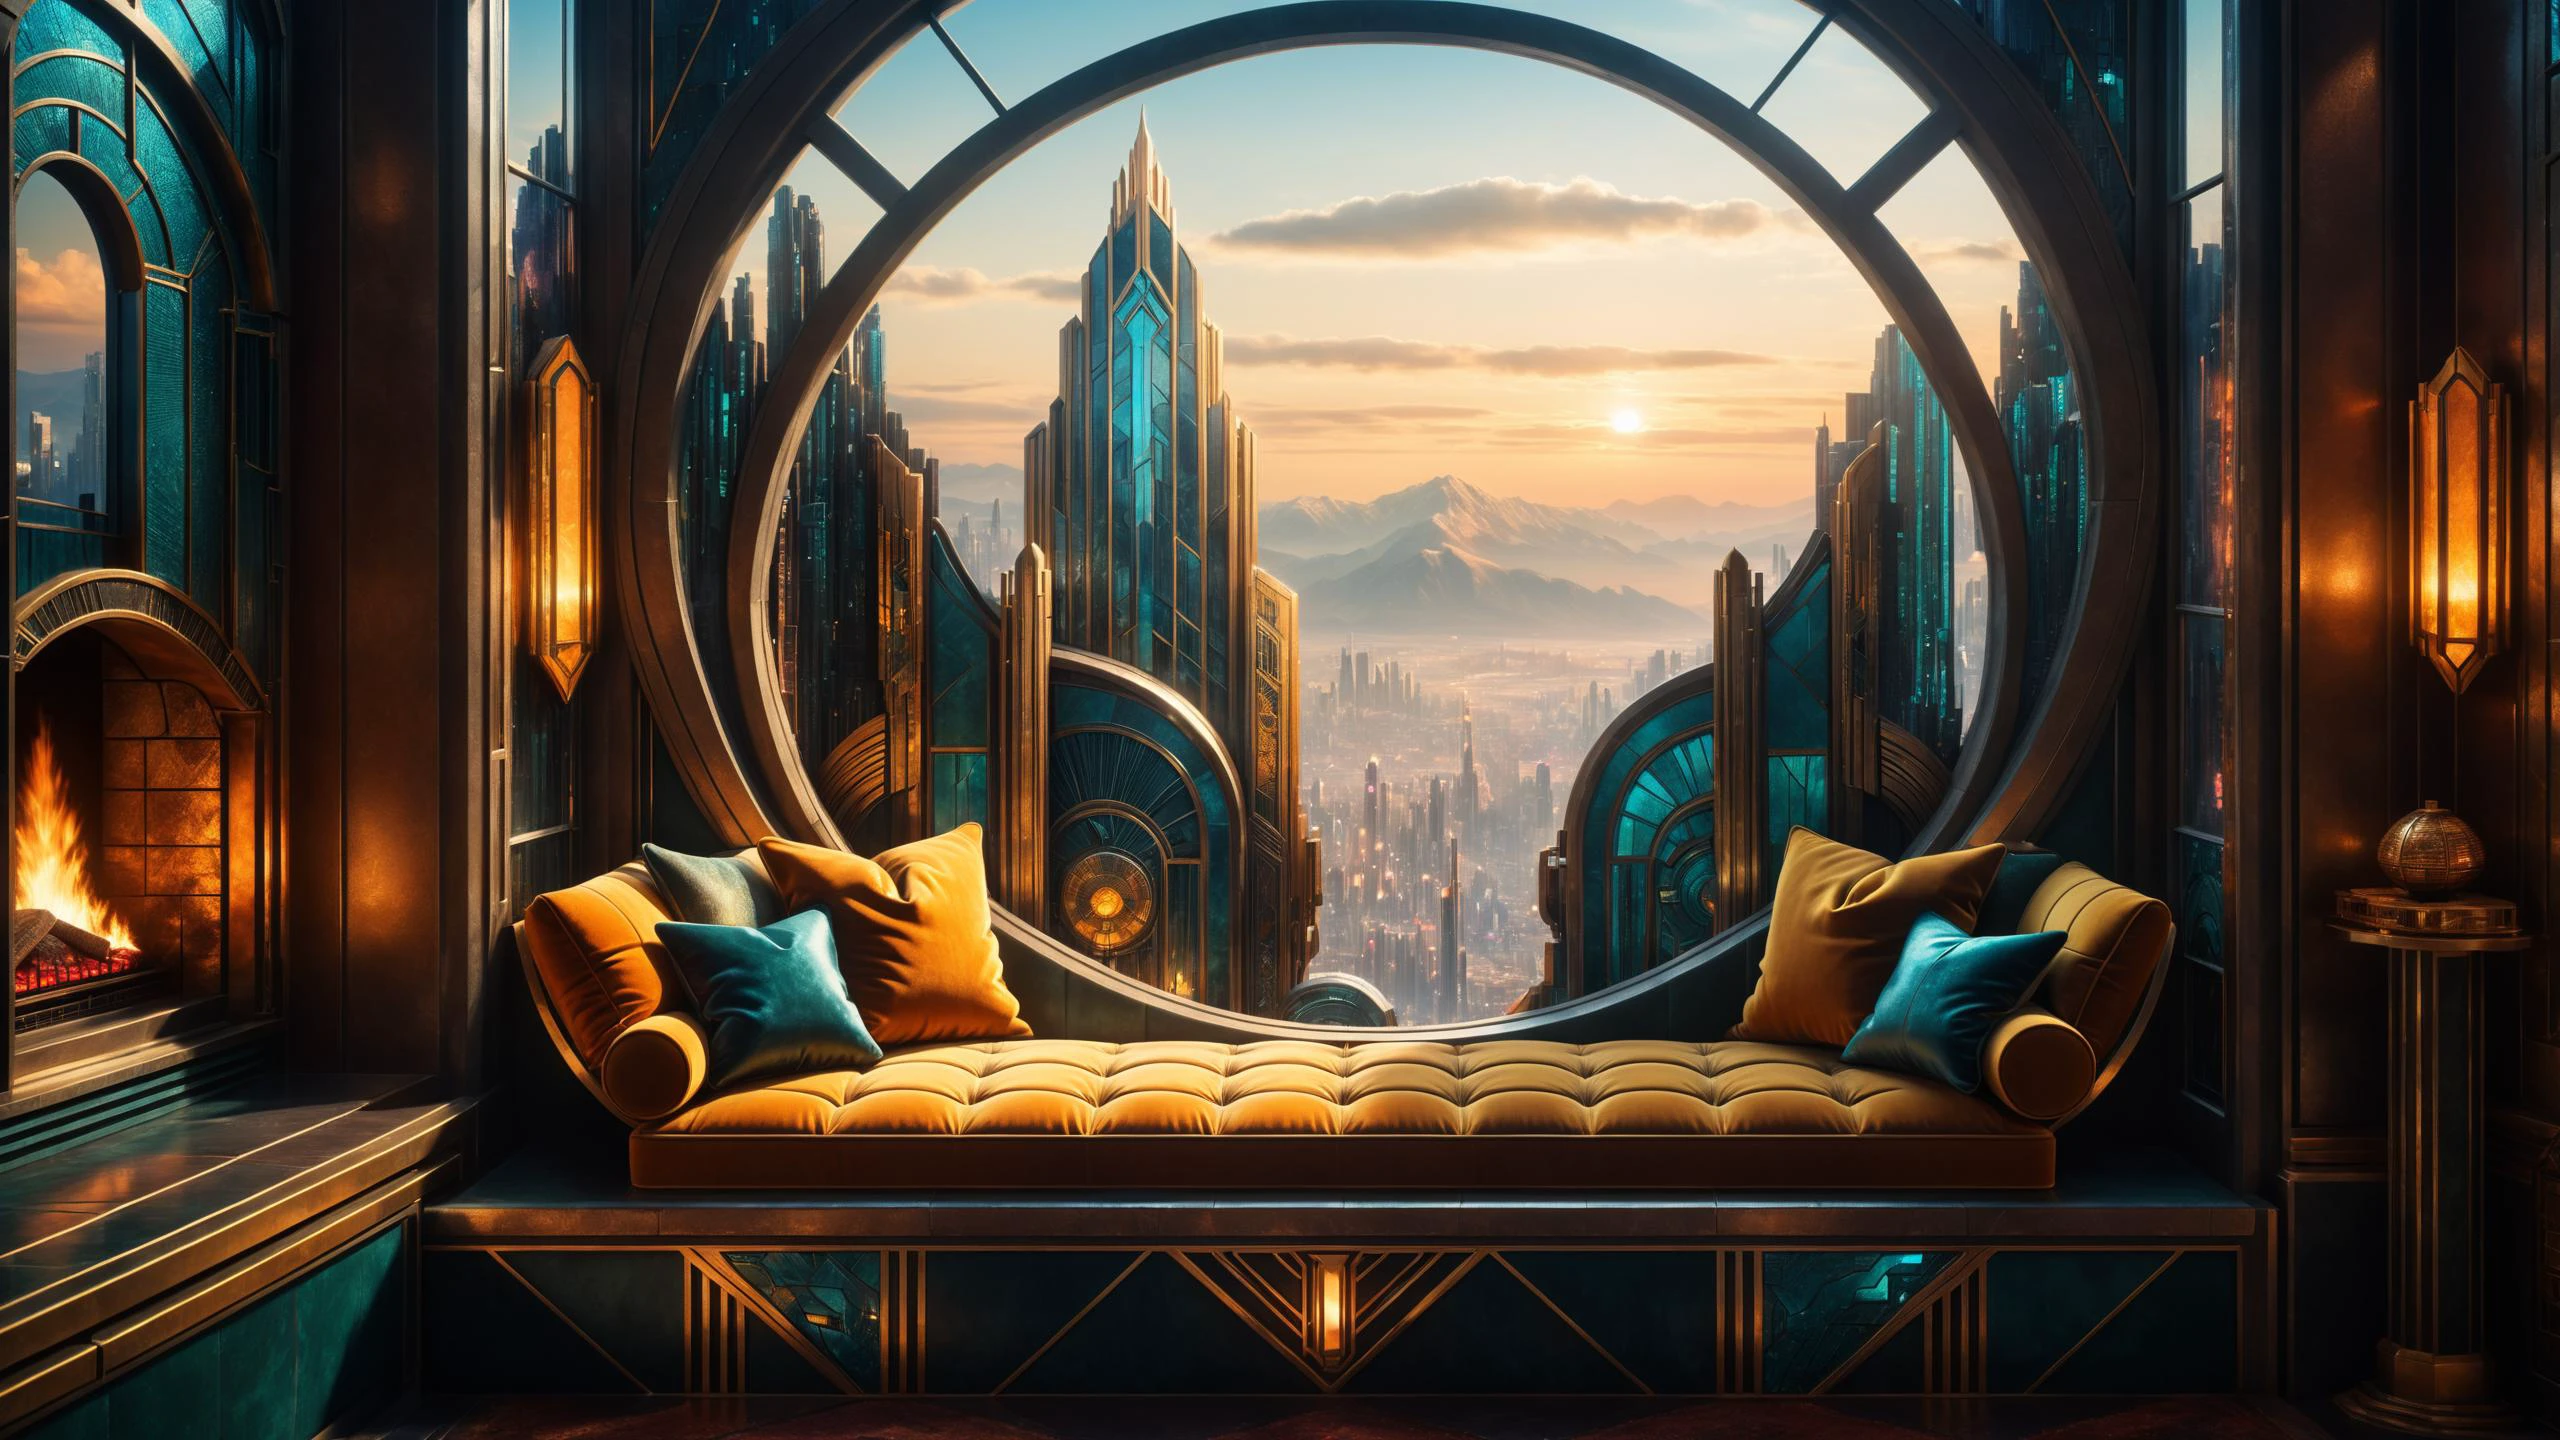 RAW photo of a  Postcyberpunk cushioned window seat with scenic backdrop, a cozy fireplace is nearby, fantasy art deco